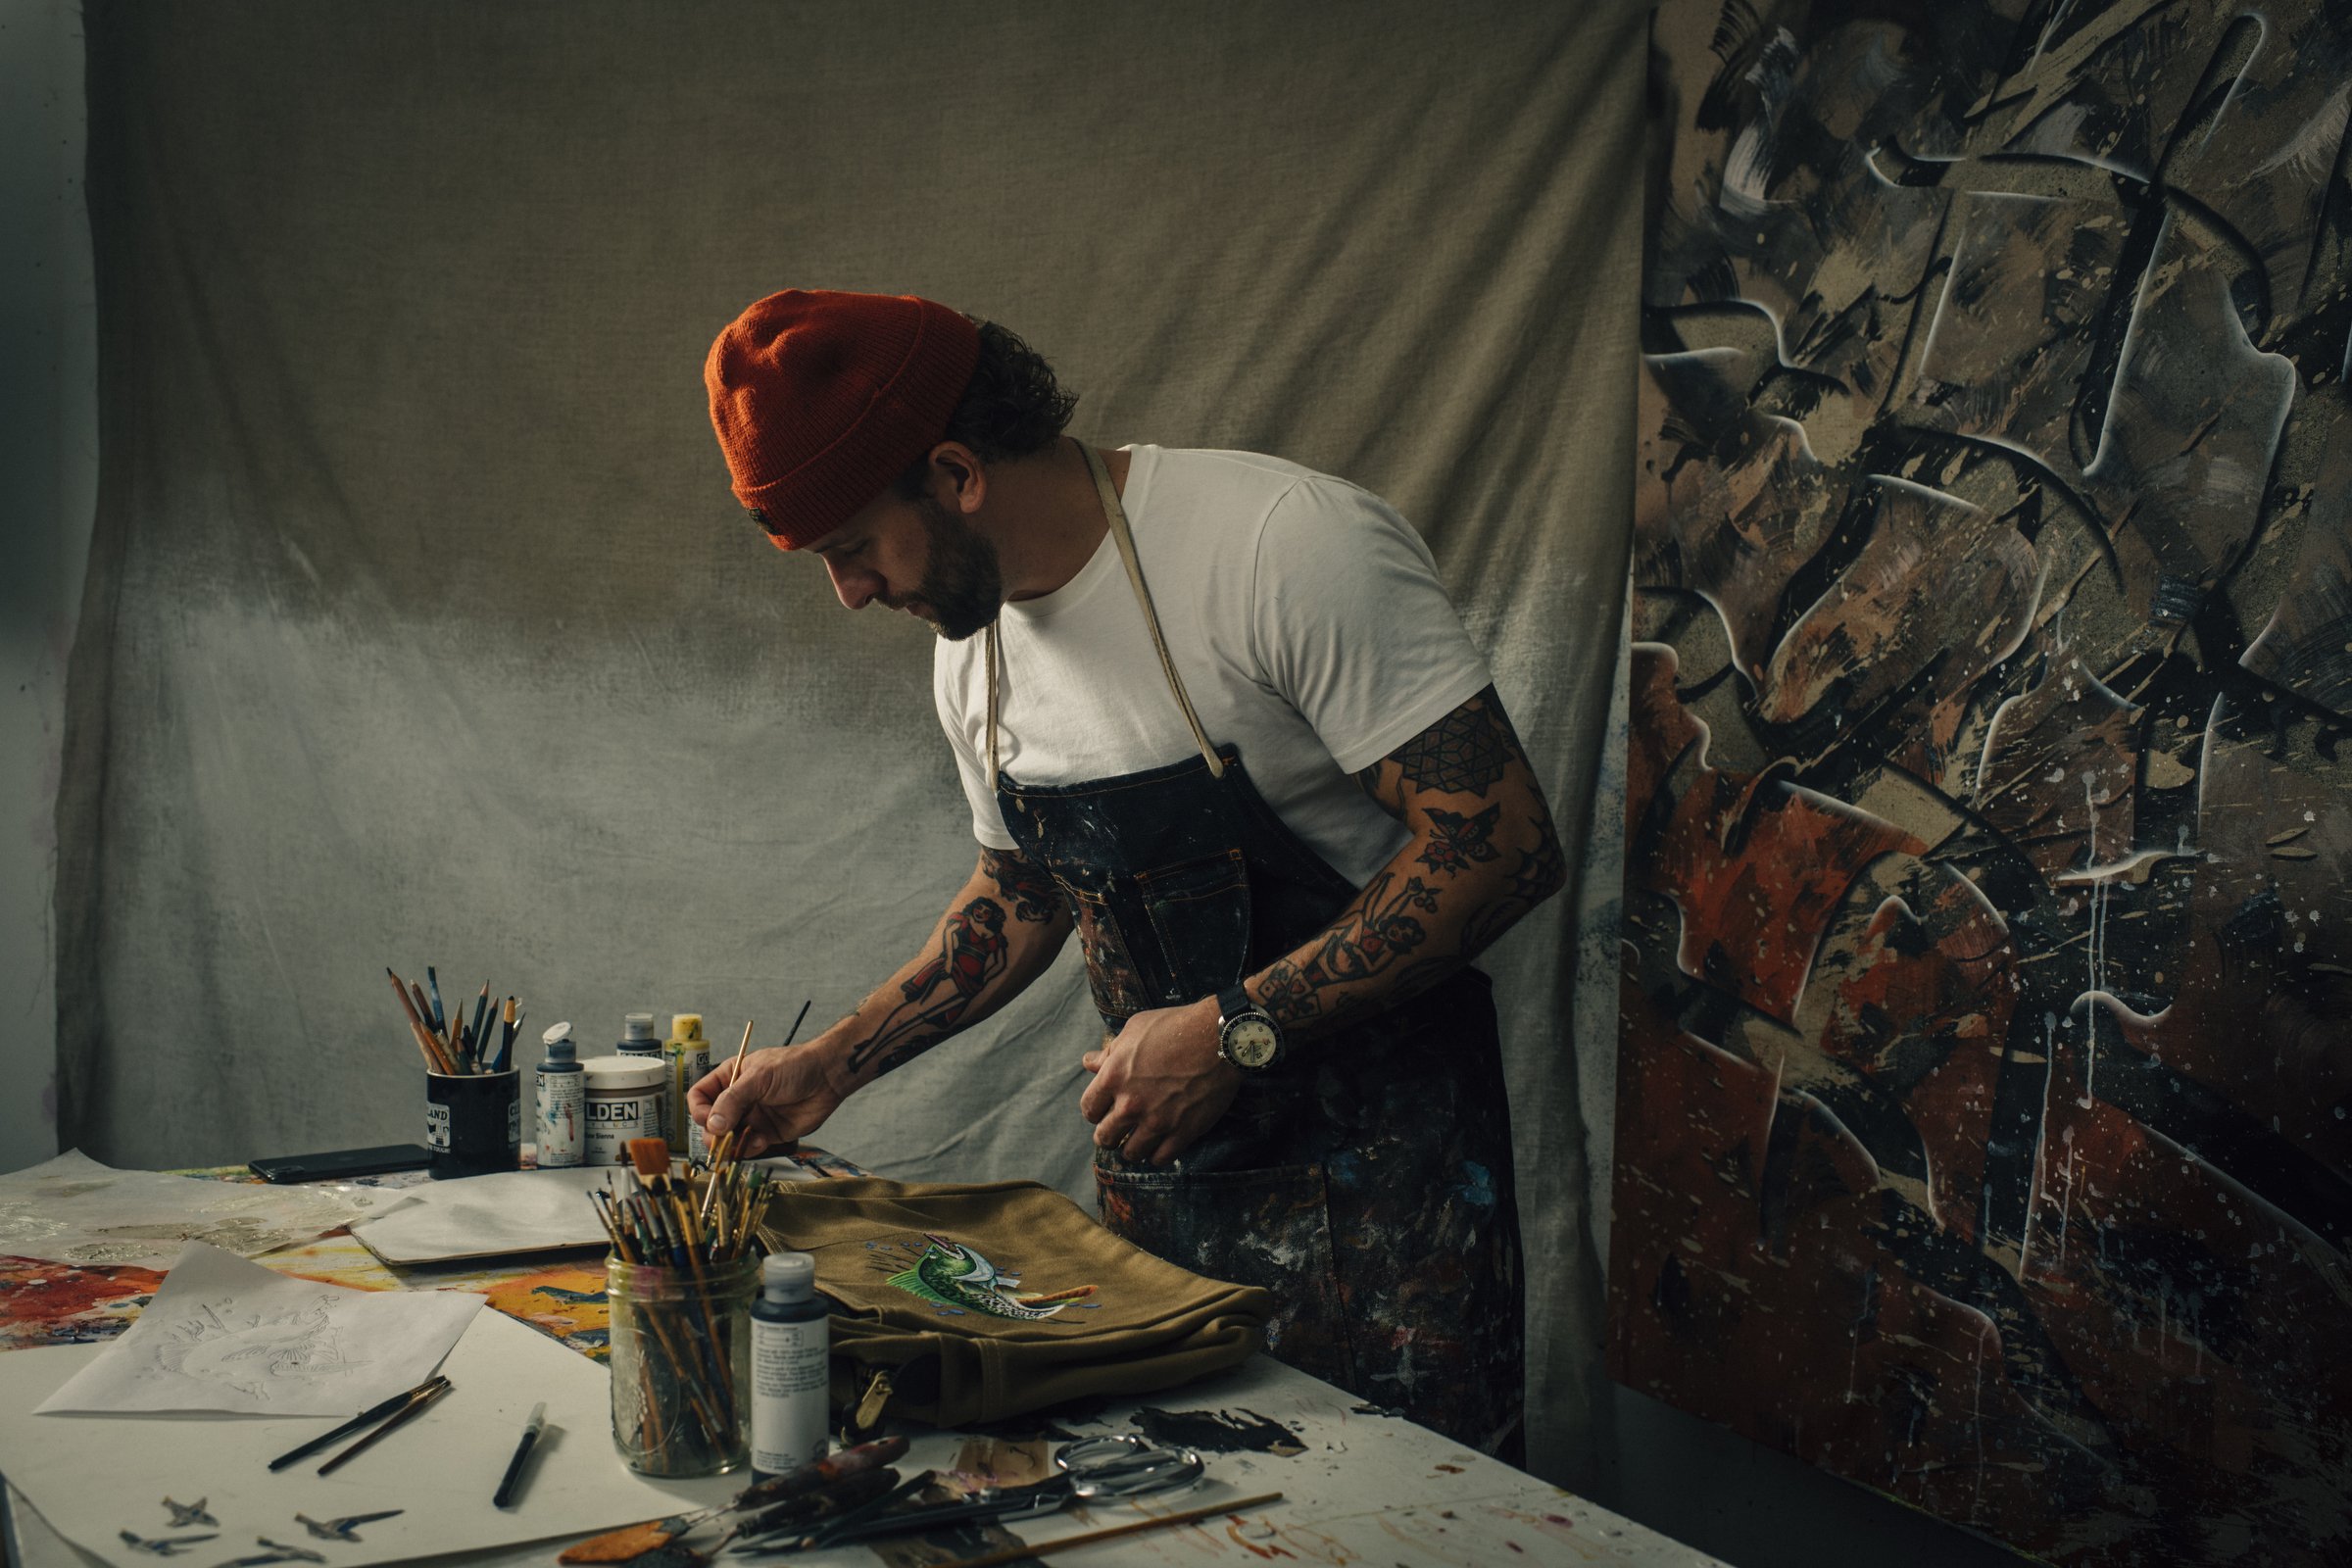  Artist Patric Hanley in collaboration with Filson 